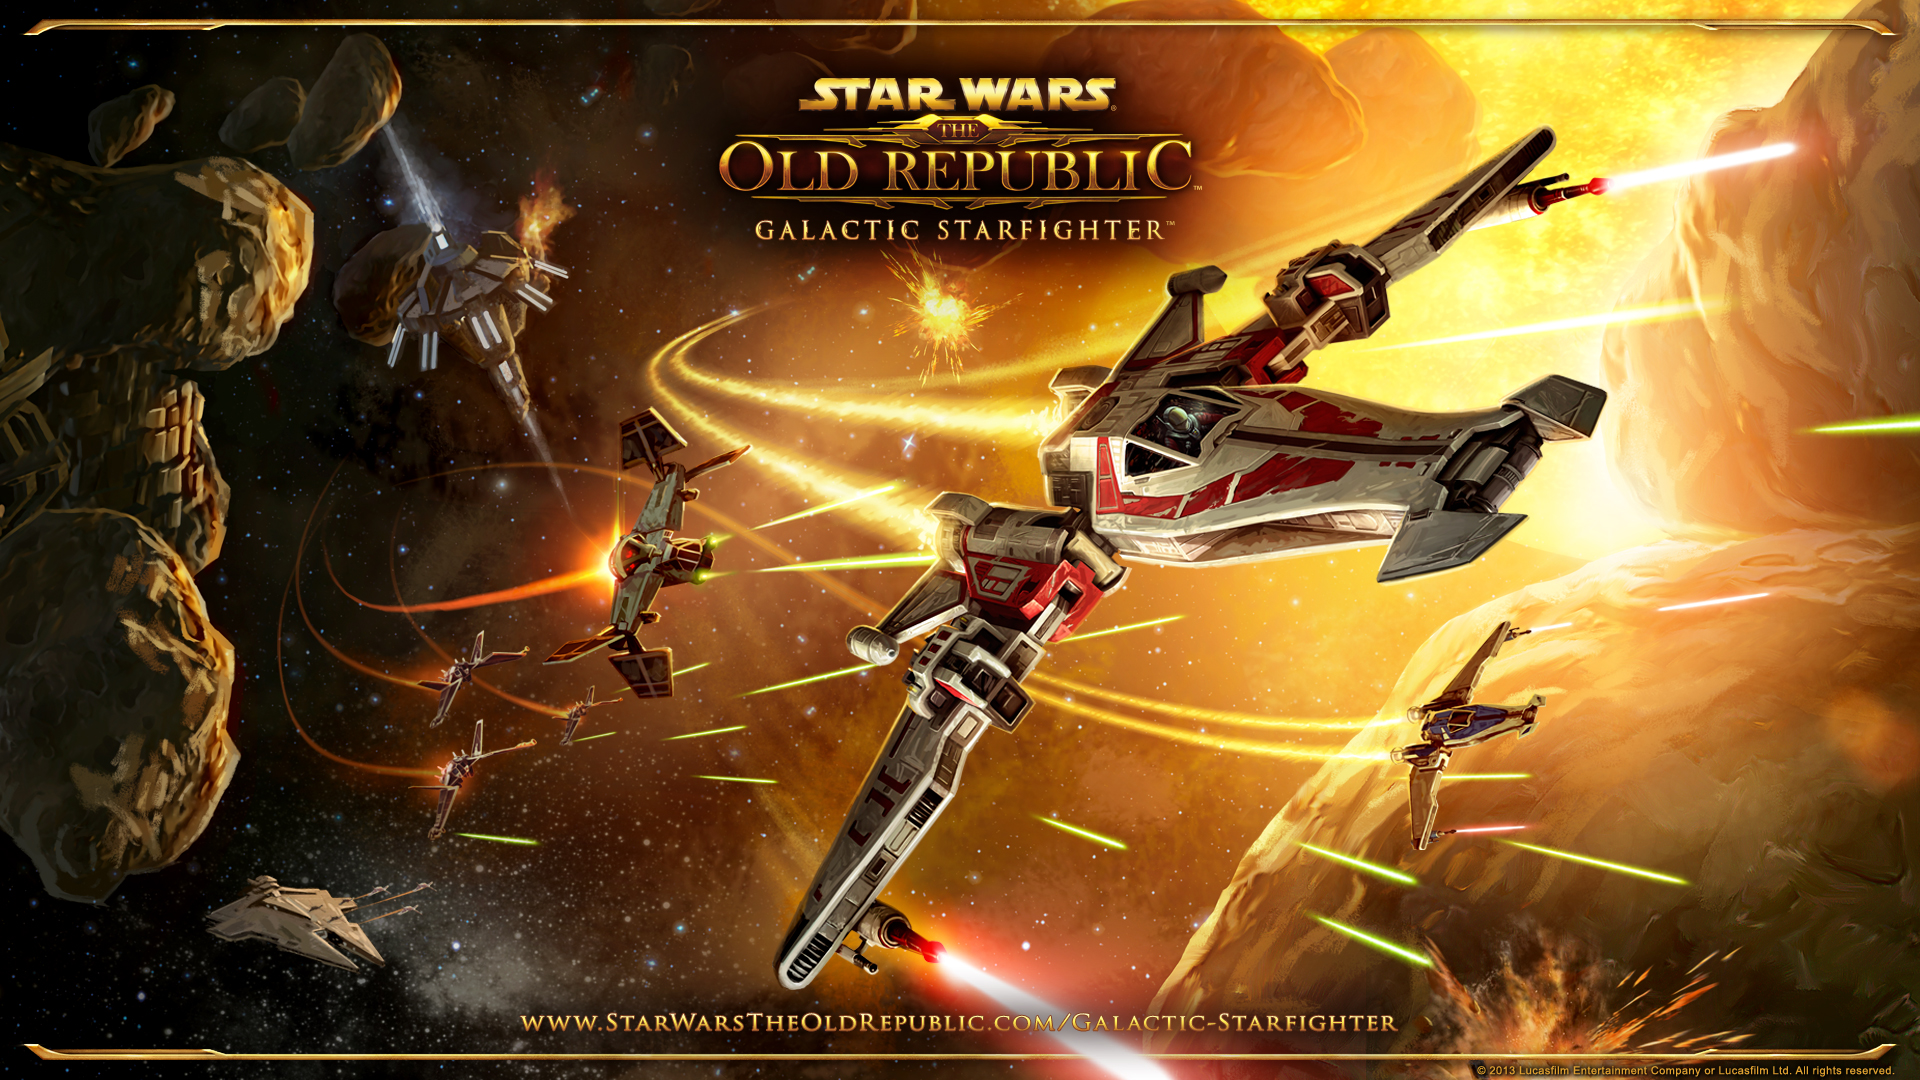 Star Wars The Old Republic Galactic Starfighter Star